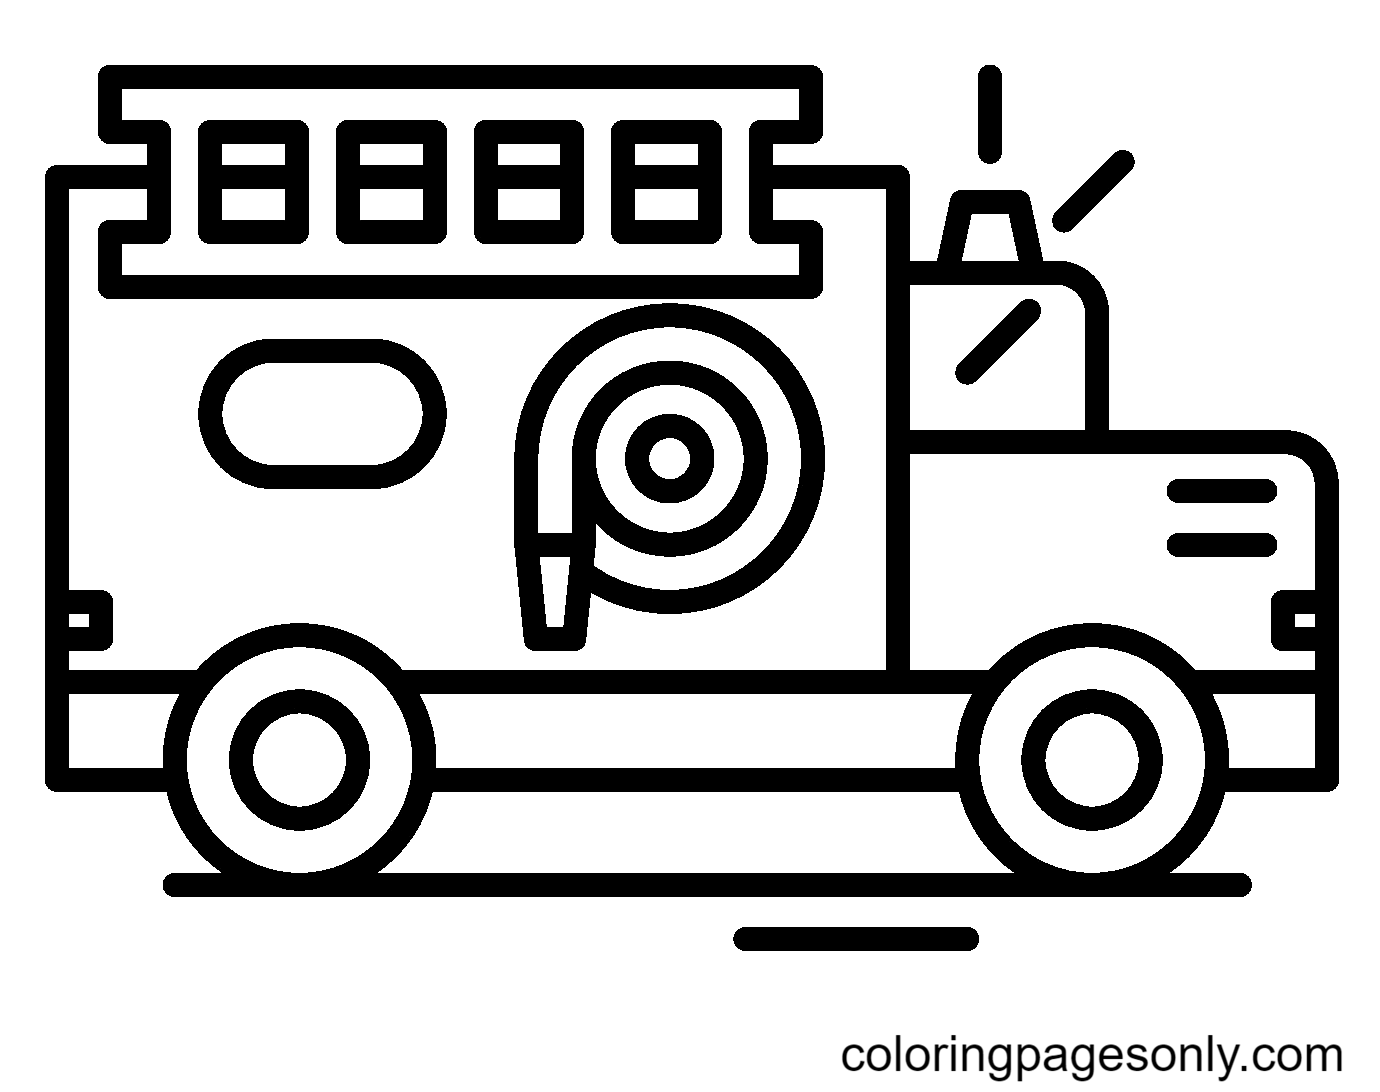 Fire Truck for Preschool Coloring Page